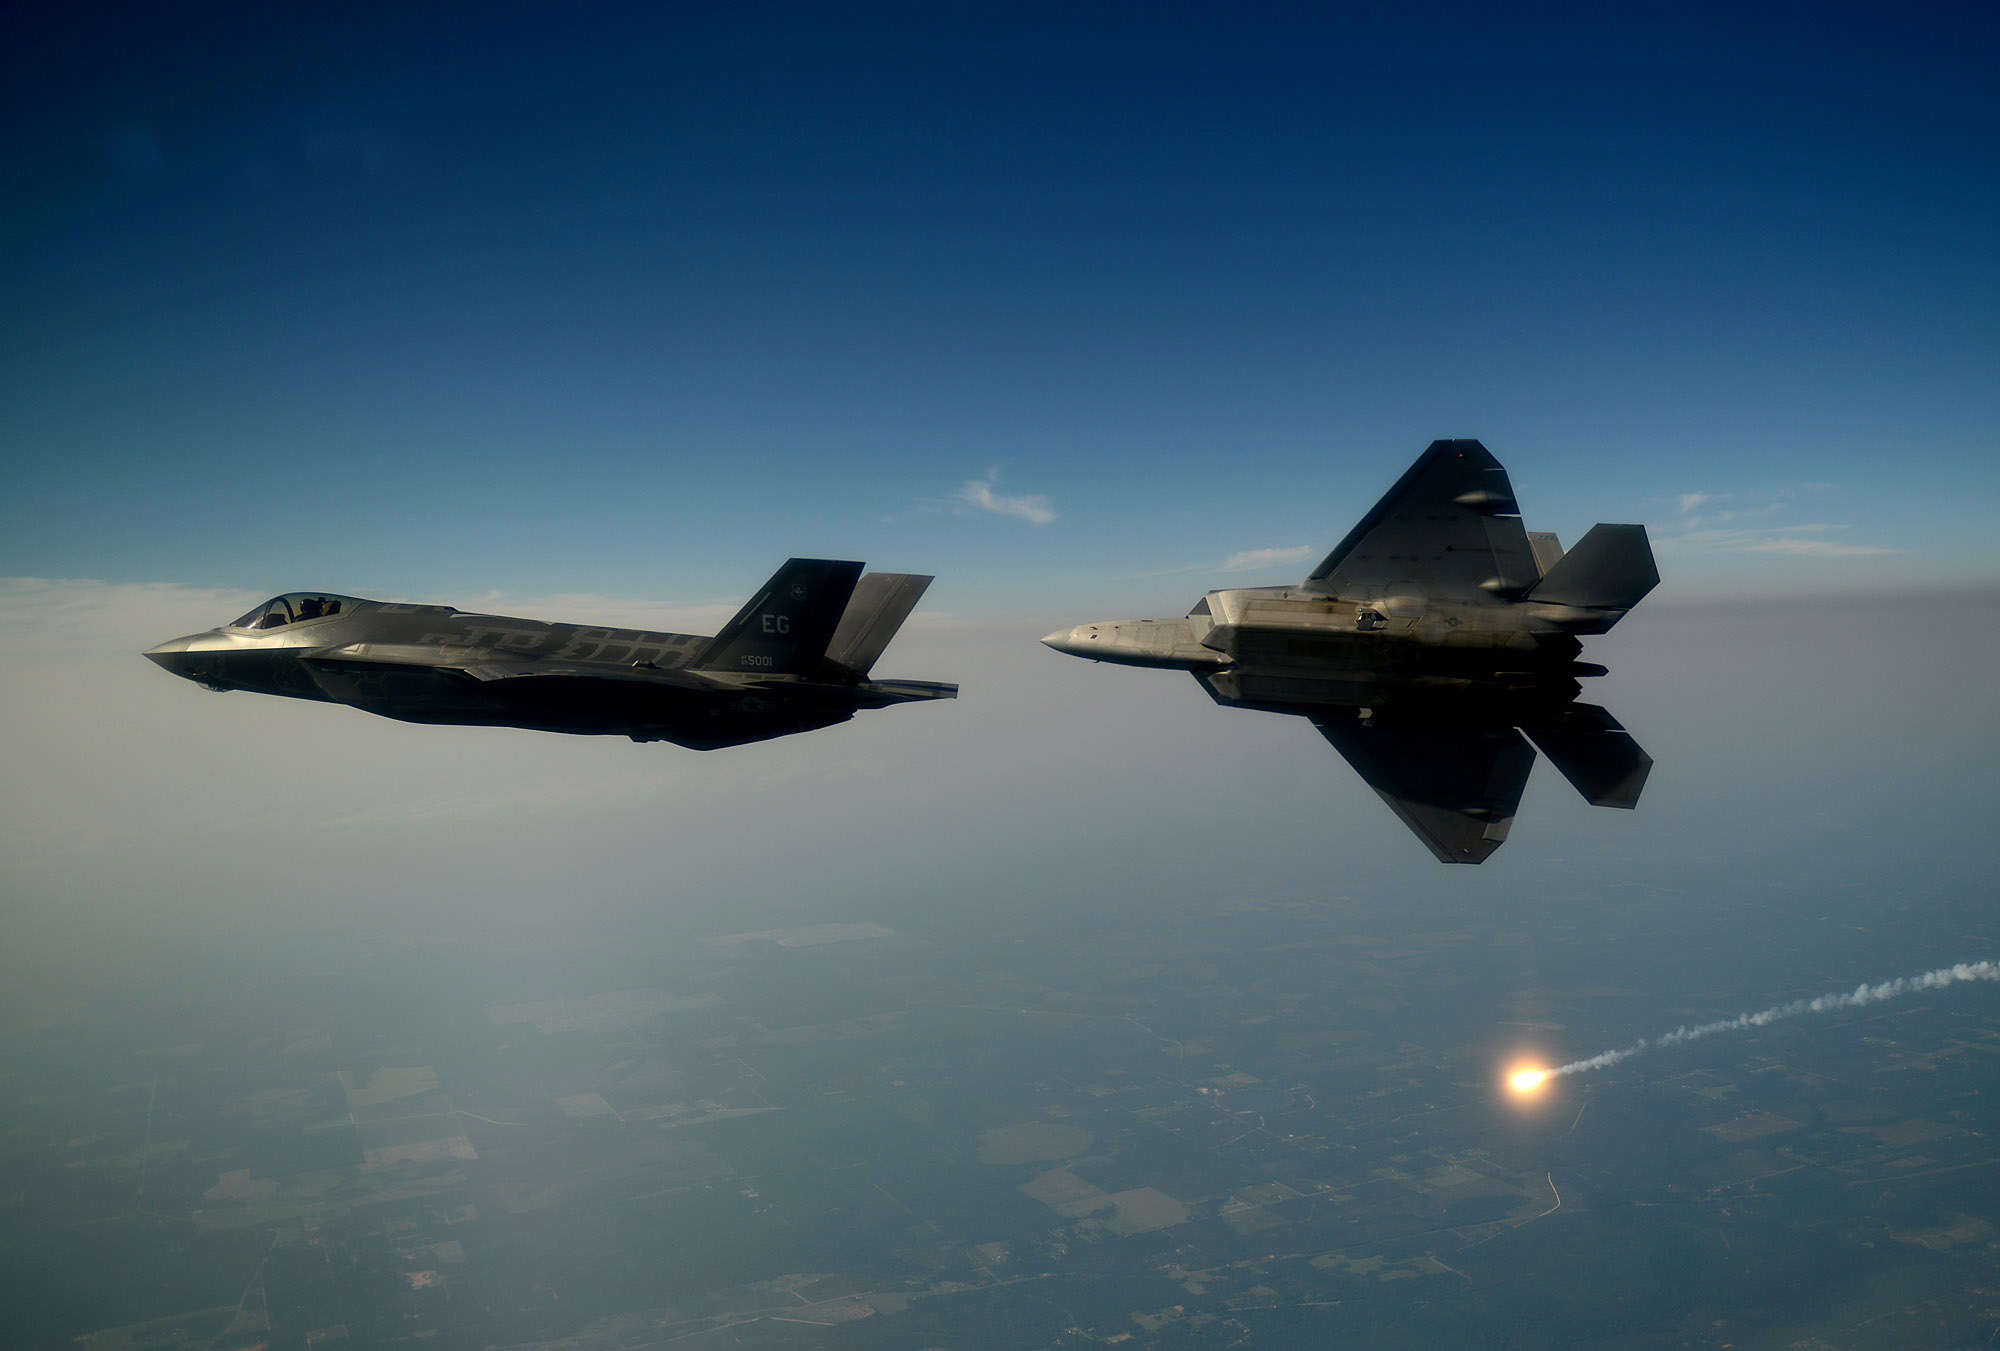 Here’s how to win (or at least survive) a dogfight in an F-35